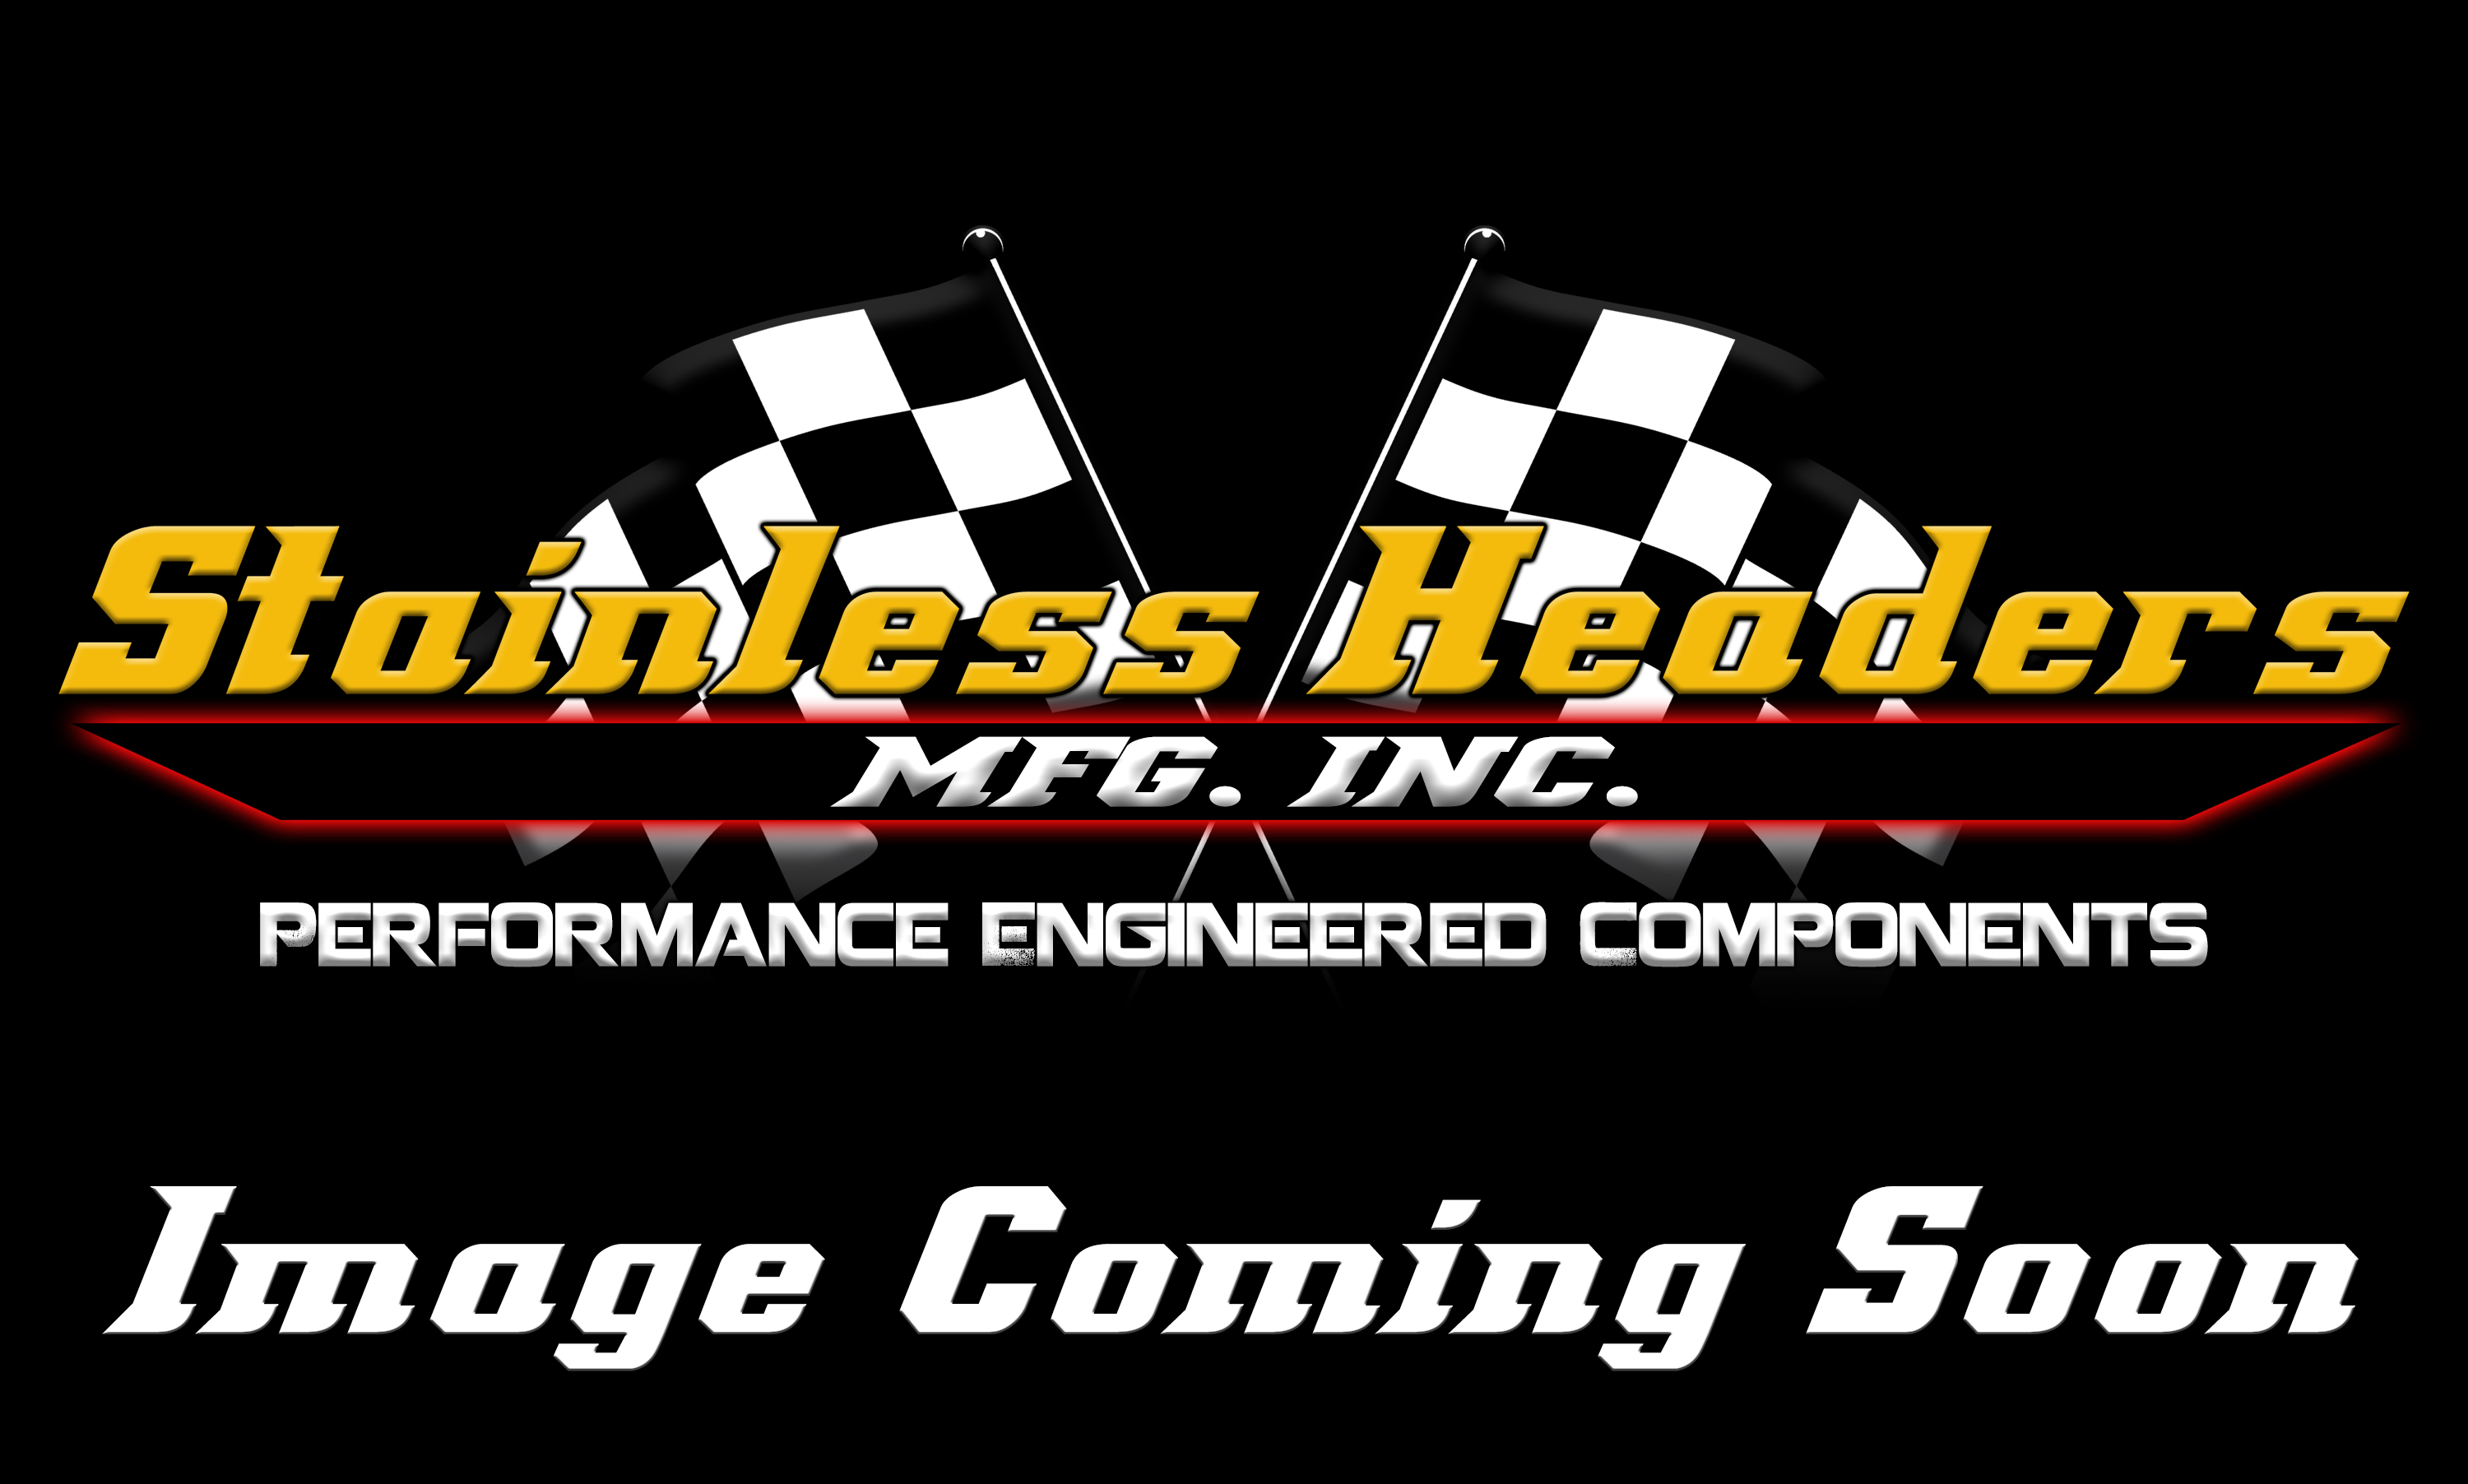 Stainless Headers - 2 1/2" Primary 8 into 1 Performance Merge Collector-18ga 321ss